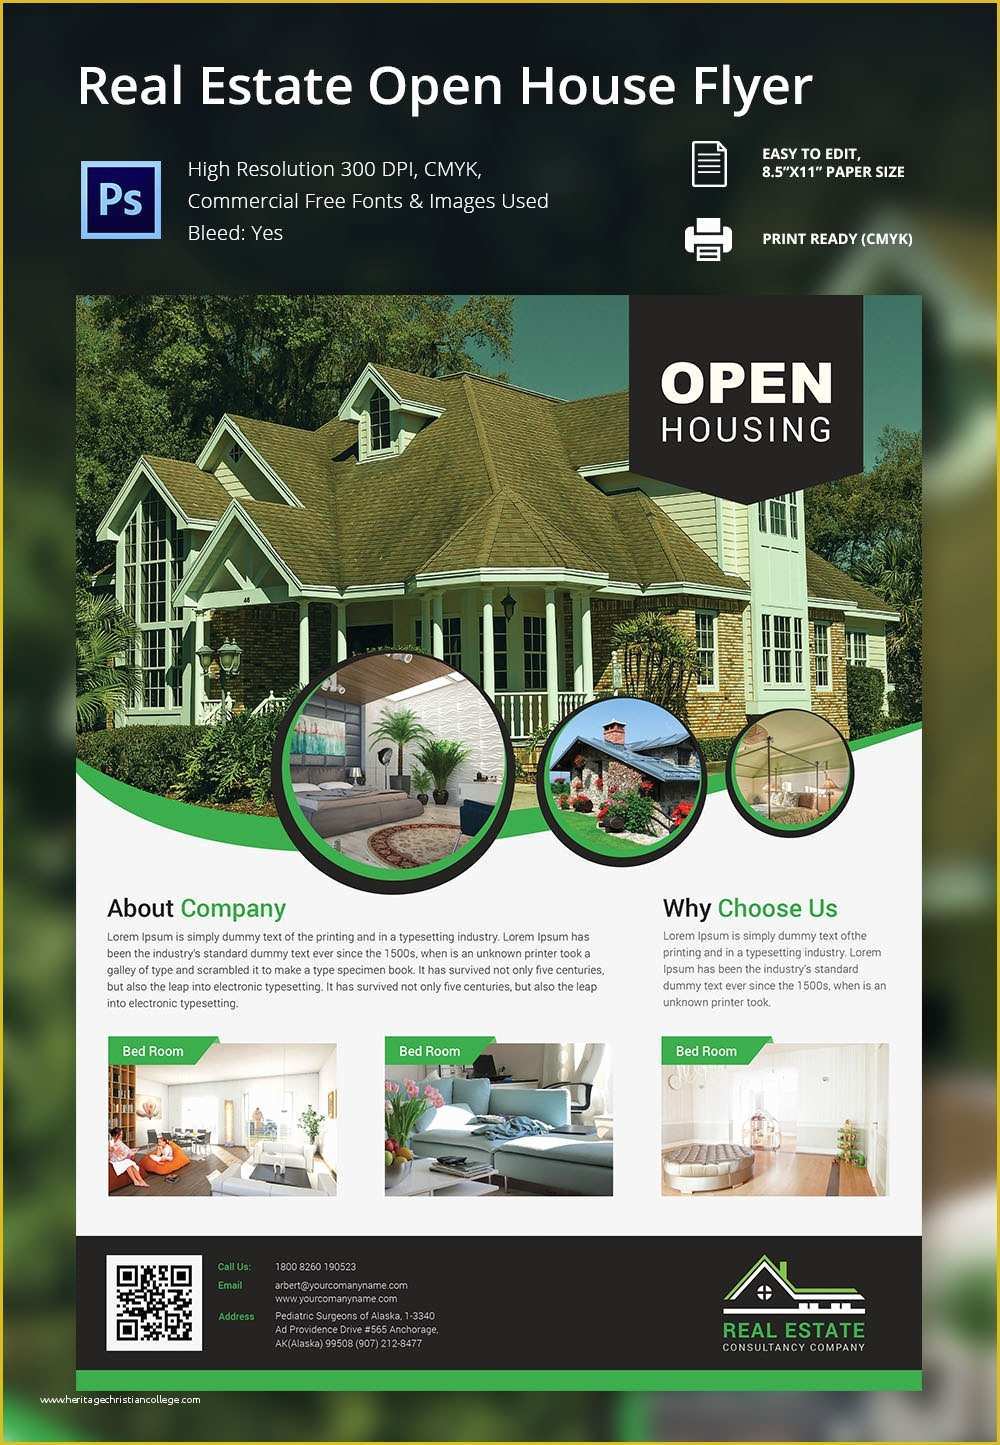 Open House Flyers Template Free Of Open House Flyer Template – 30 Free Psd format Download